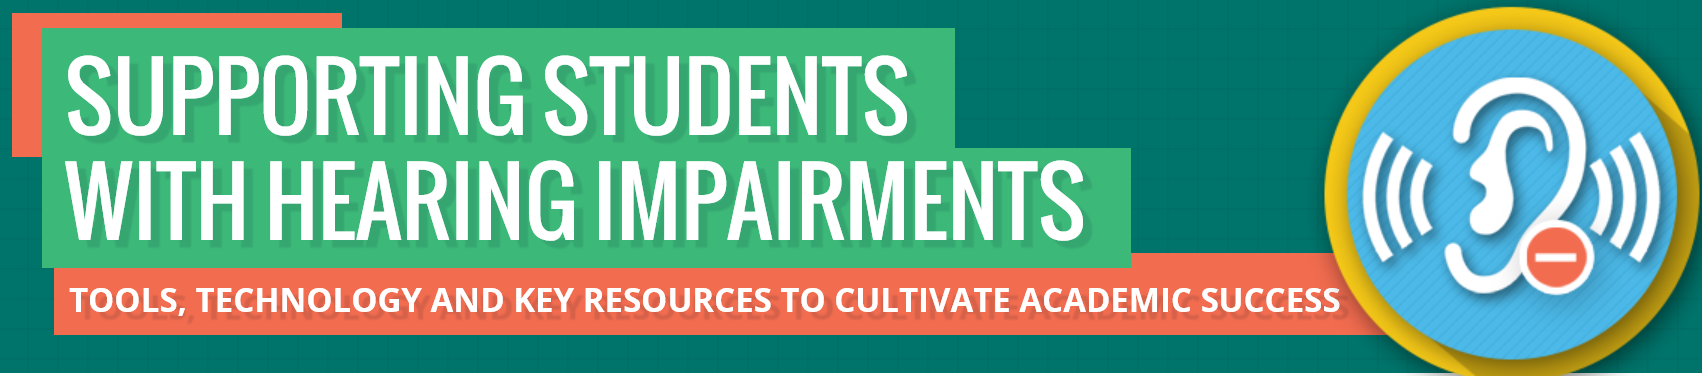 Supporting Students with Hearing Impairments: Tools, Technology and Key Resources